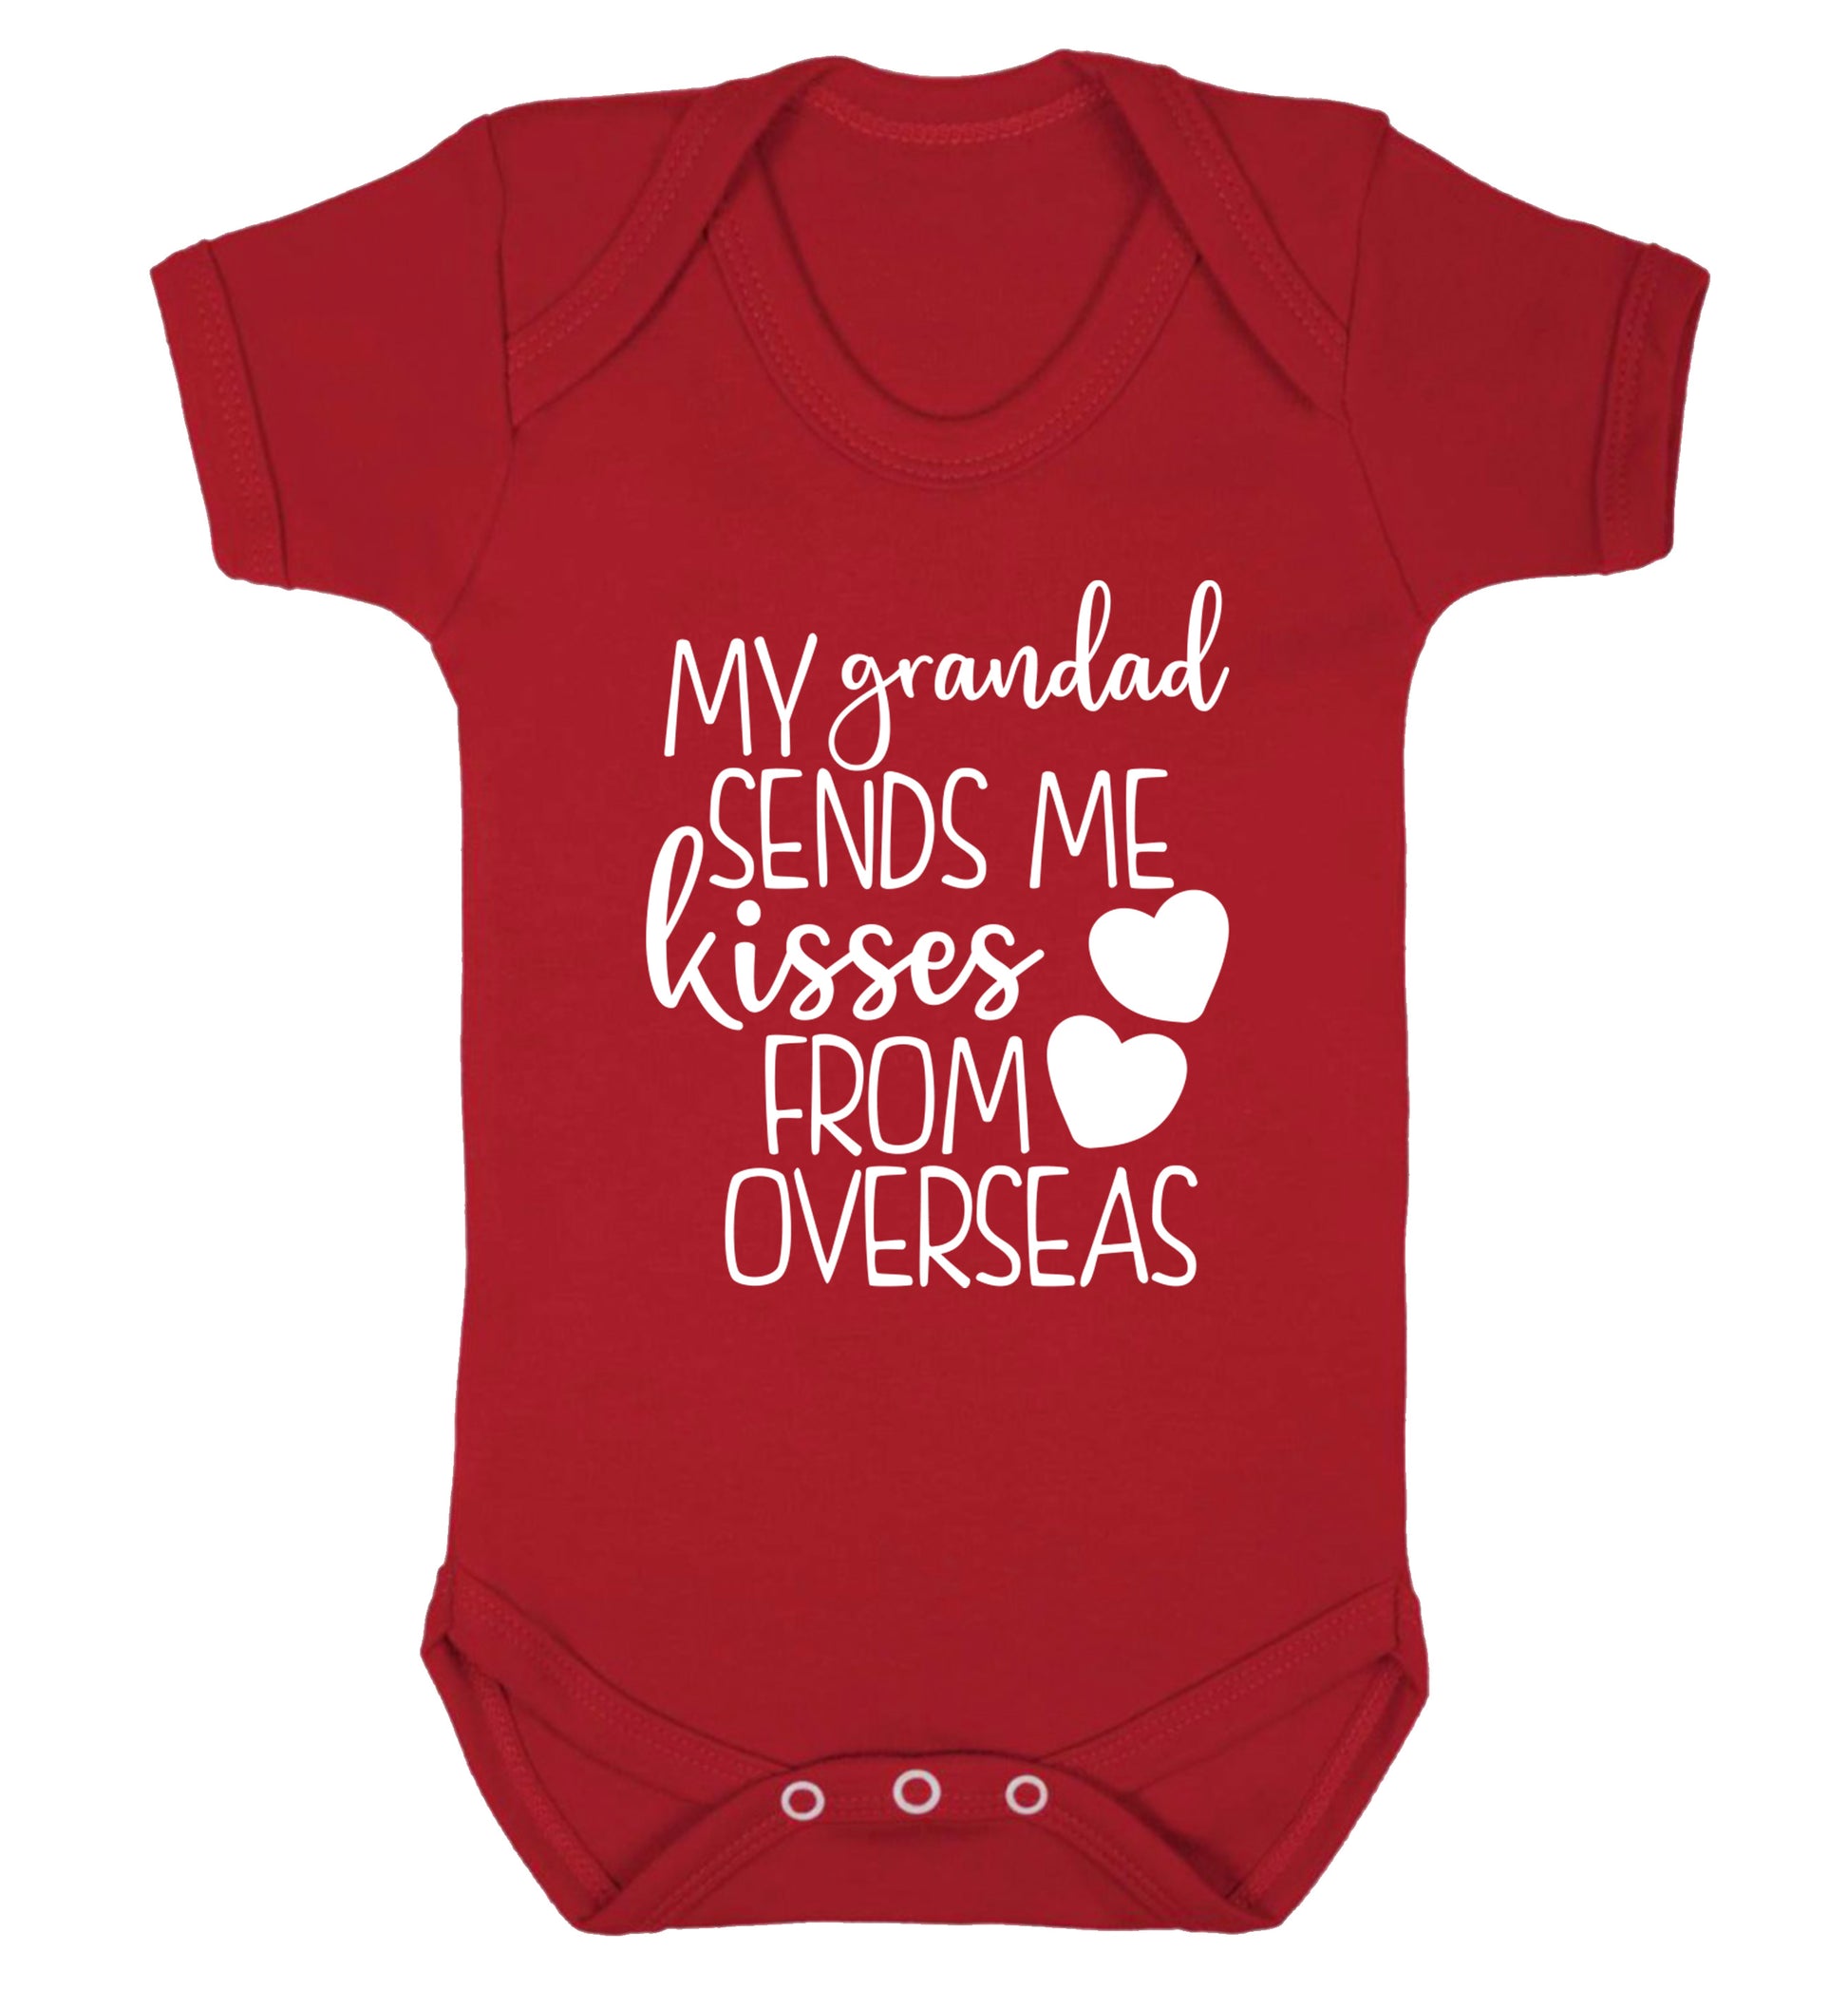 My Grandad sends me kisses from overseas Baby Vest red 18-24 months